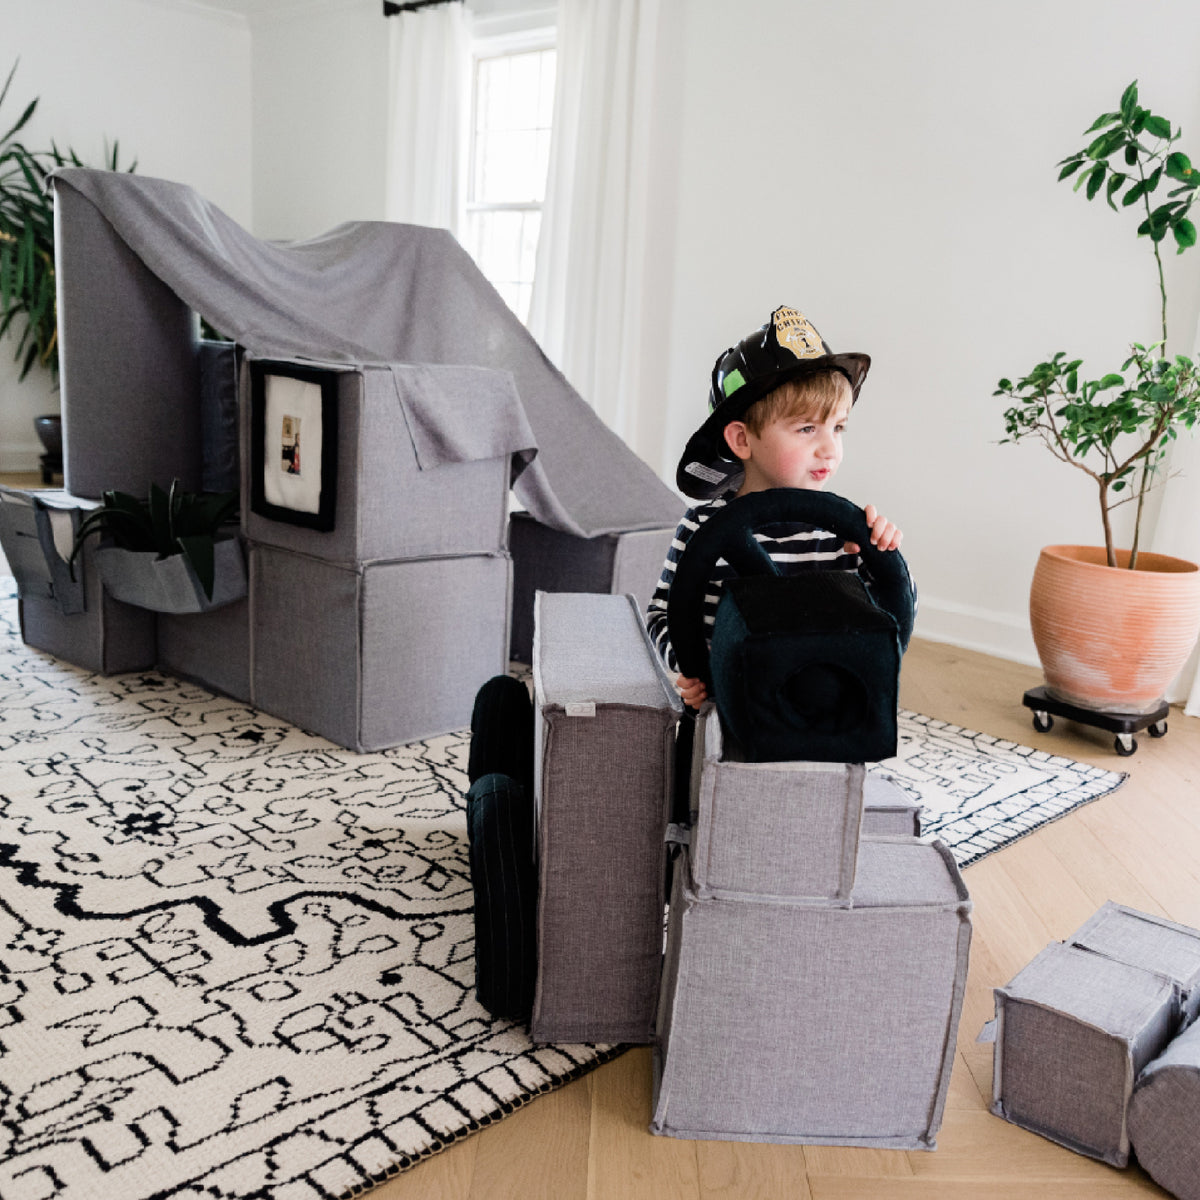 Fort building and Firetruck pretending. Little Creatives provides modern play furniture with beautiful fabrics.